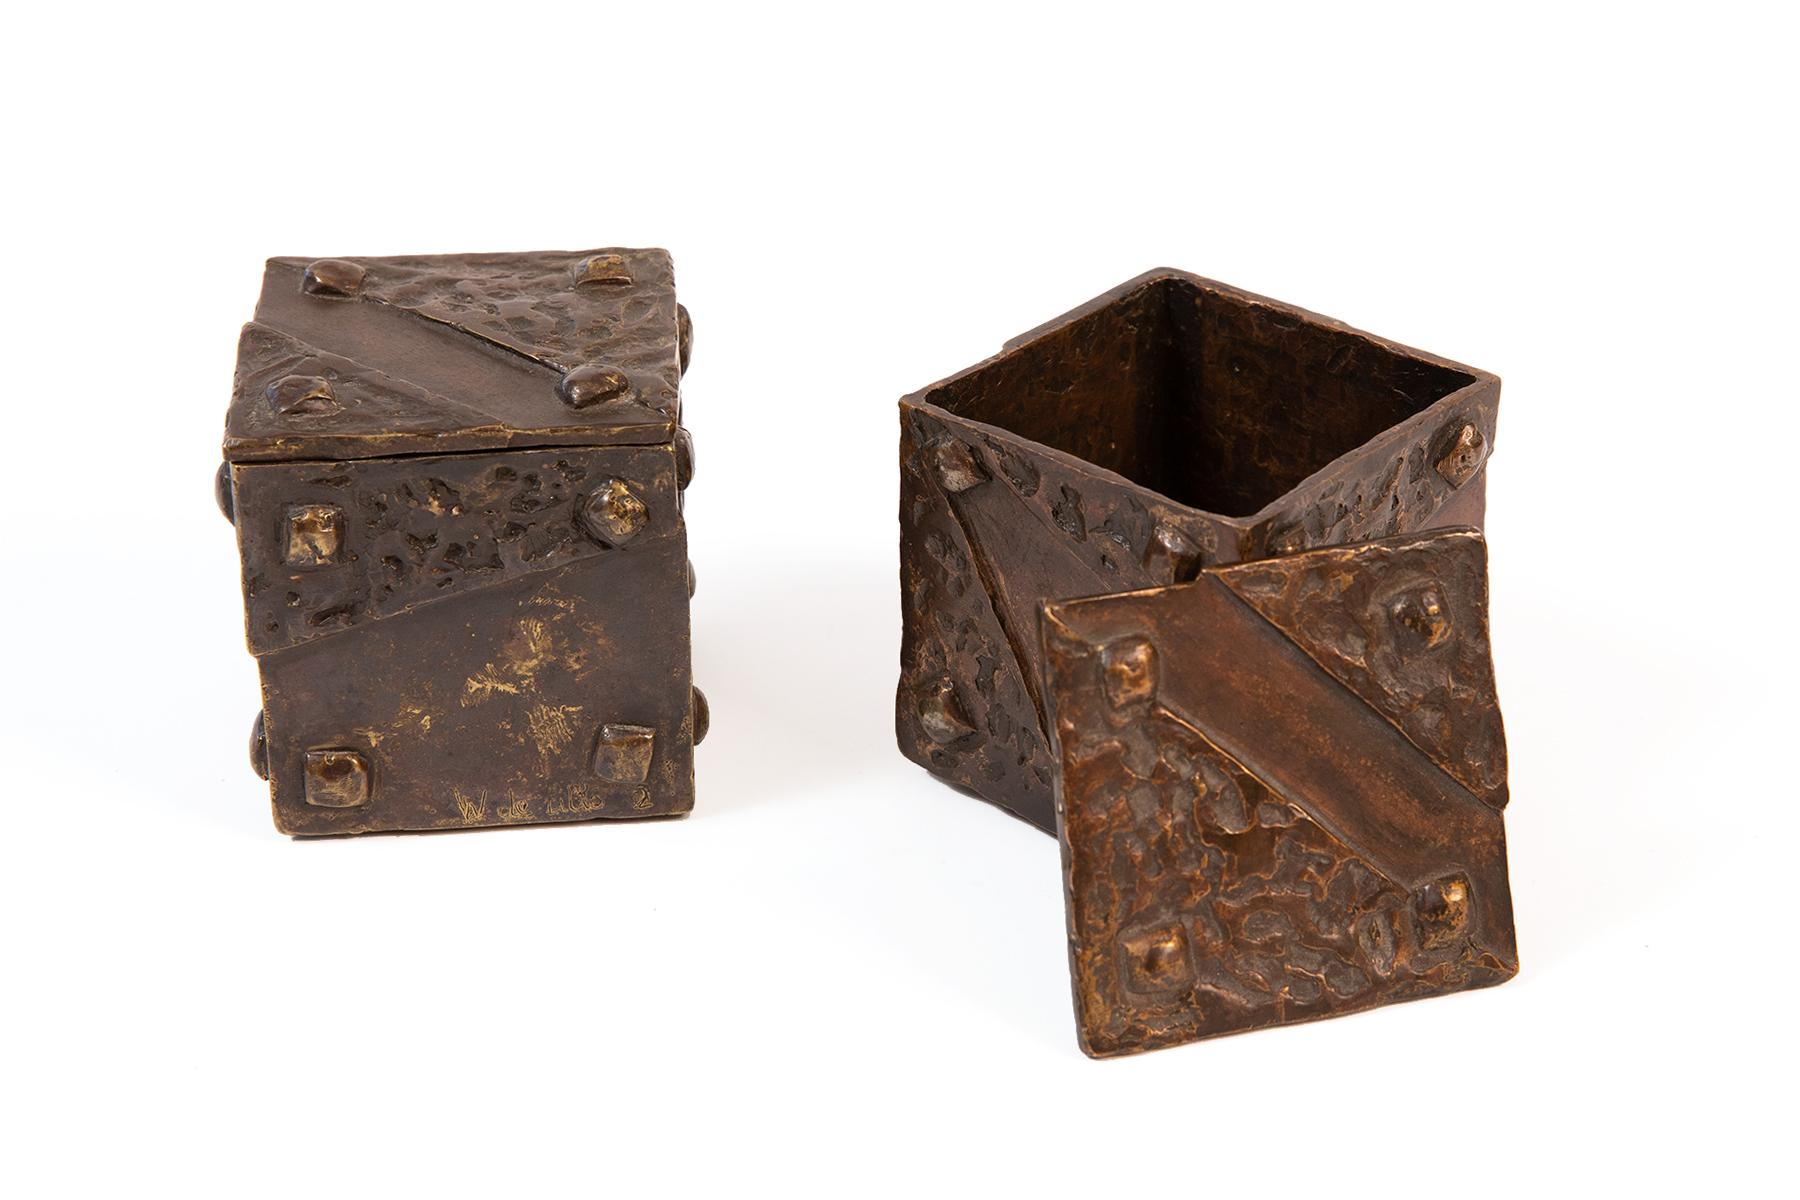 Three bronze Brutalist style sculptural boxes by William De Lillo from the 1970s.
The jeweler and artist, William De Lillo worked with Harry Winston, Cartier New York and most famously as Jean Schlumberger’s assistant at Tiffany & Co. Mr. de Lillo